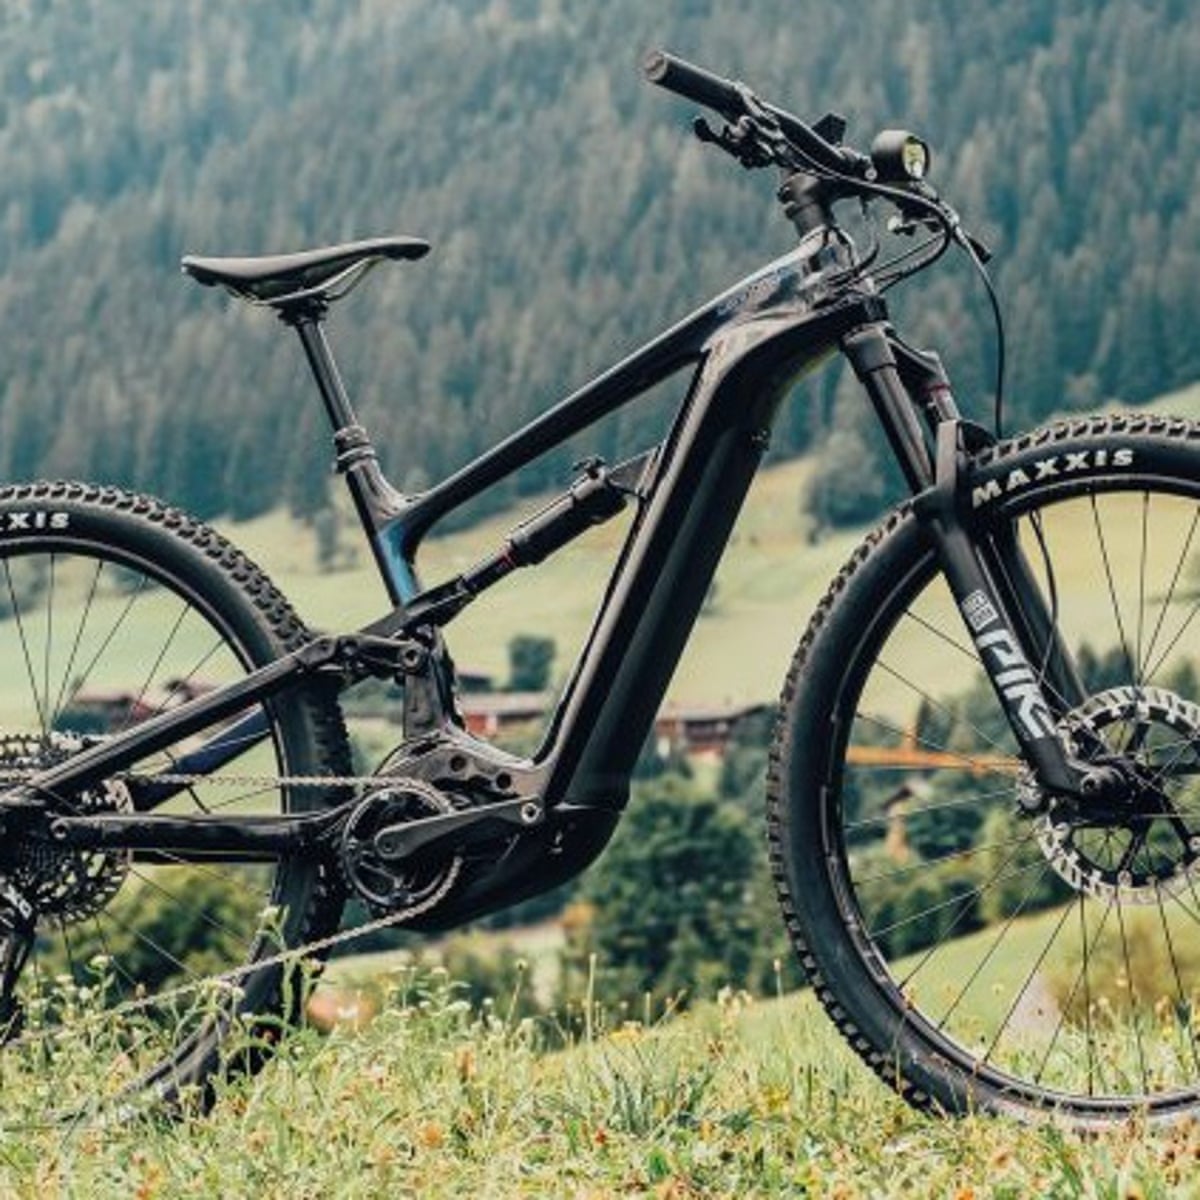 Madison kader cultuur Cannondale Habit NEO preview: 'The bike for fast and flowing trails' |  Technology | The Guardian